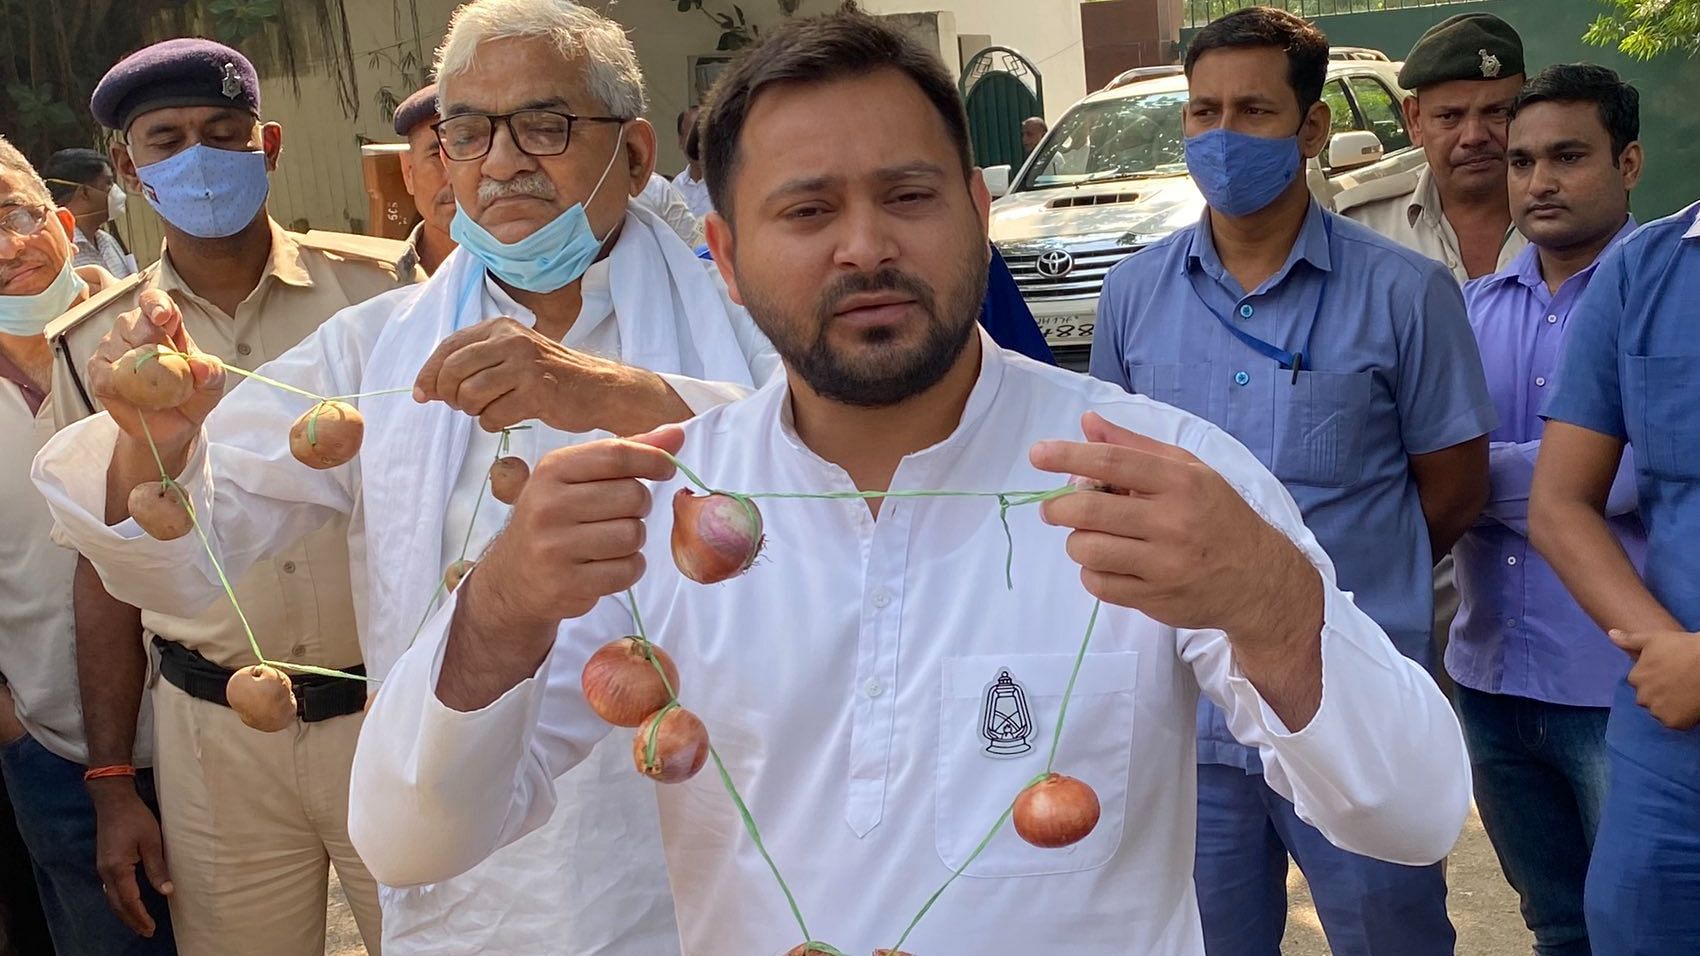 “Farmers are being destroyed and youth is unemployed,” Tejashwi Yadav said ahead of Bihar assembly elections.